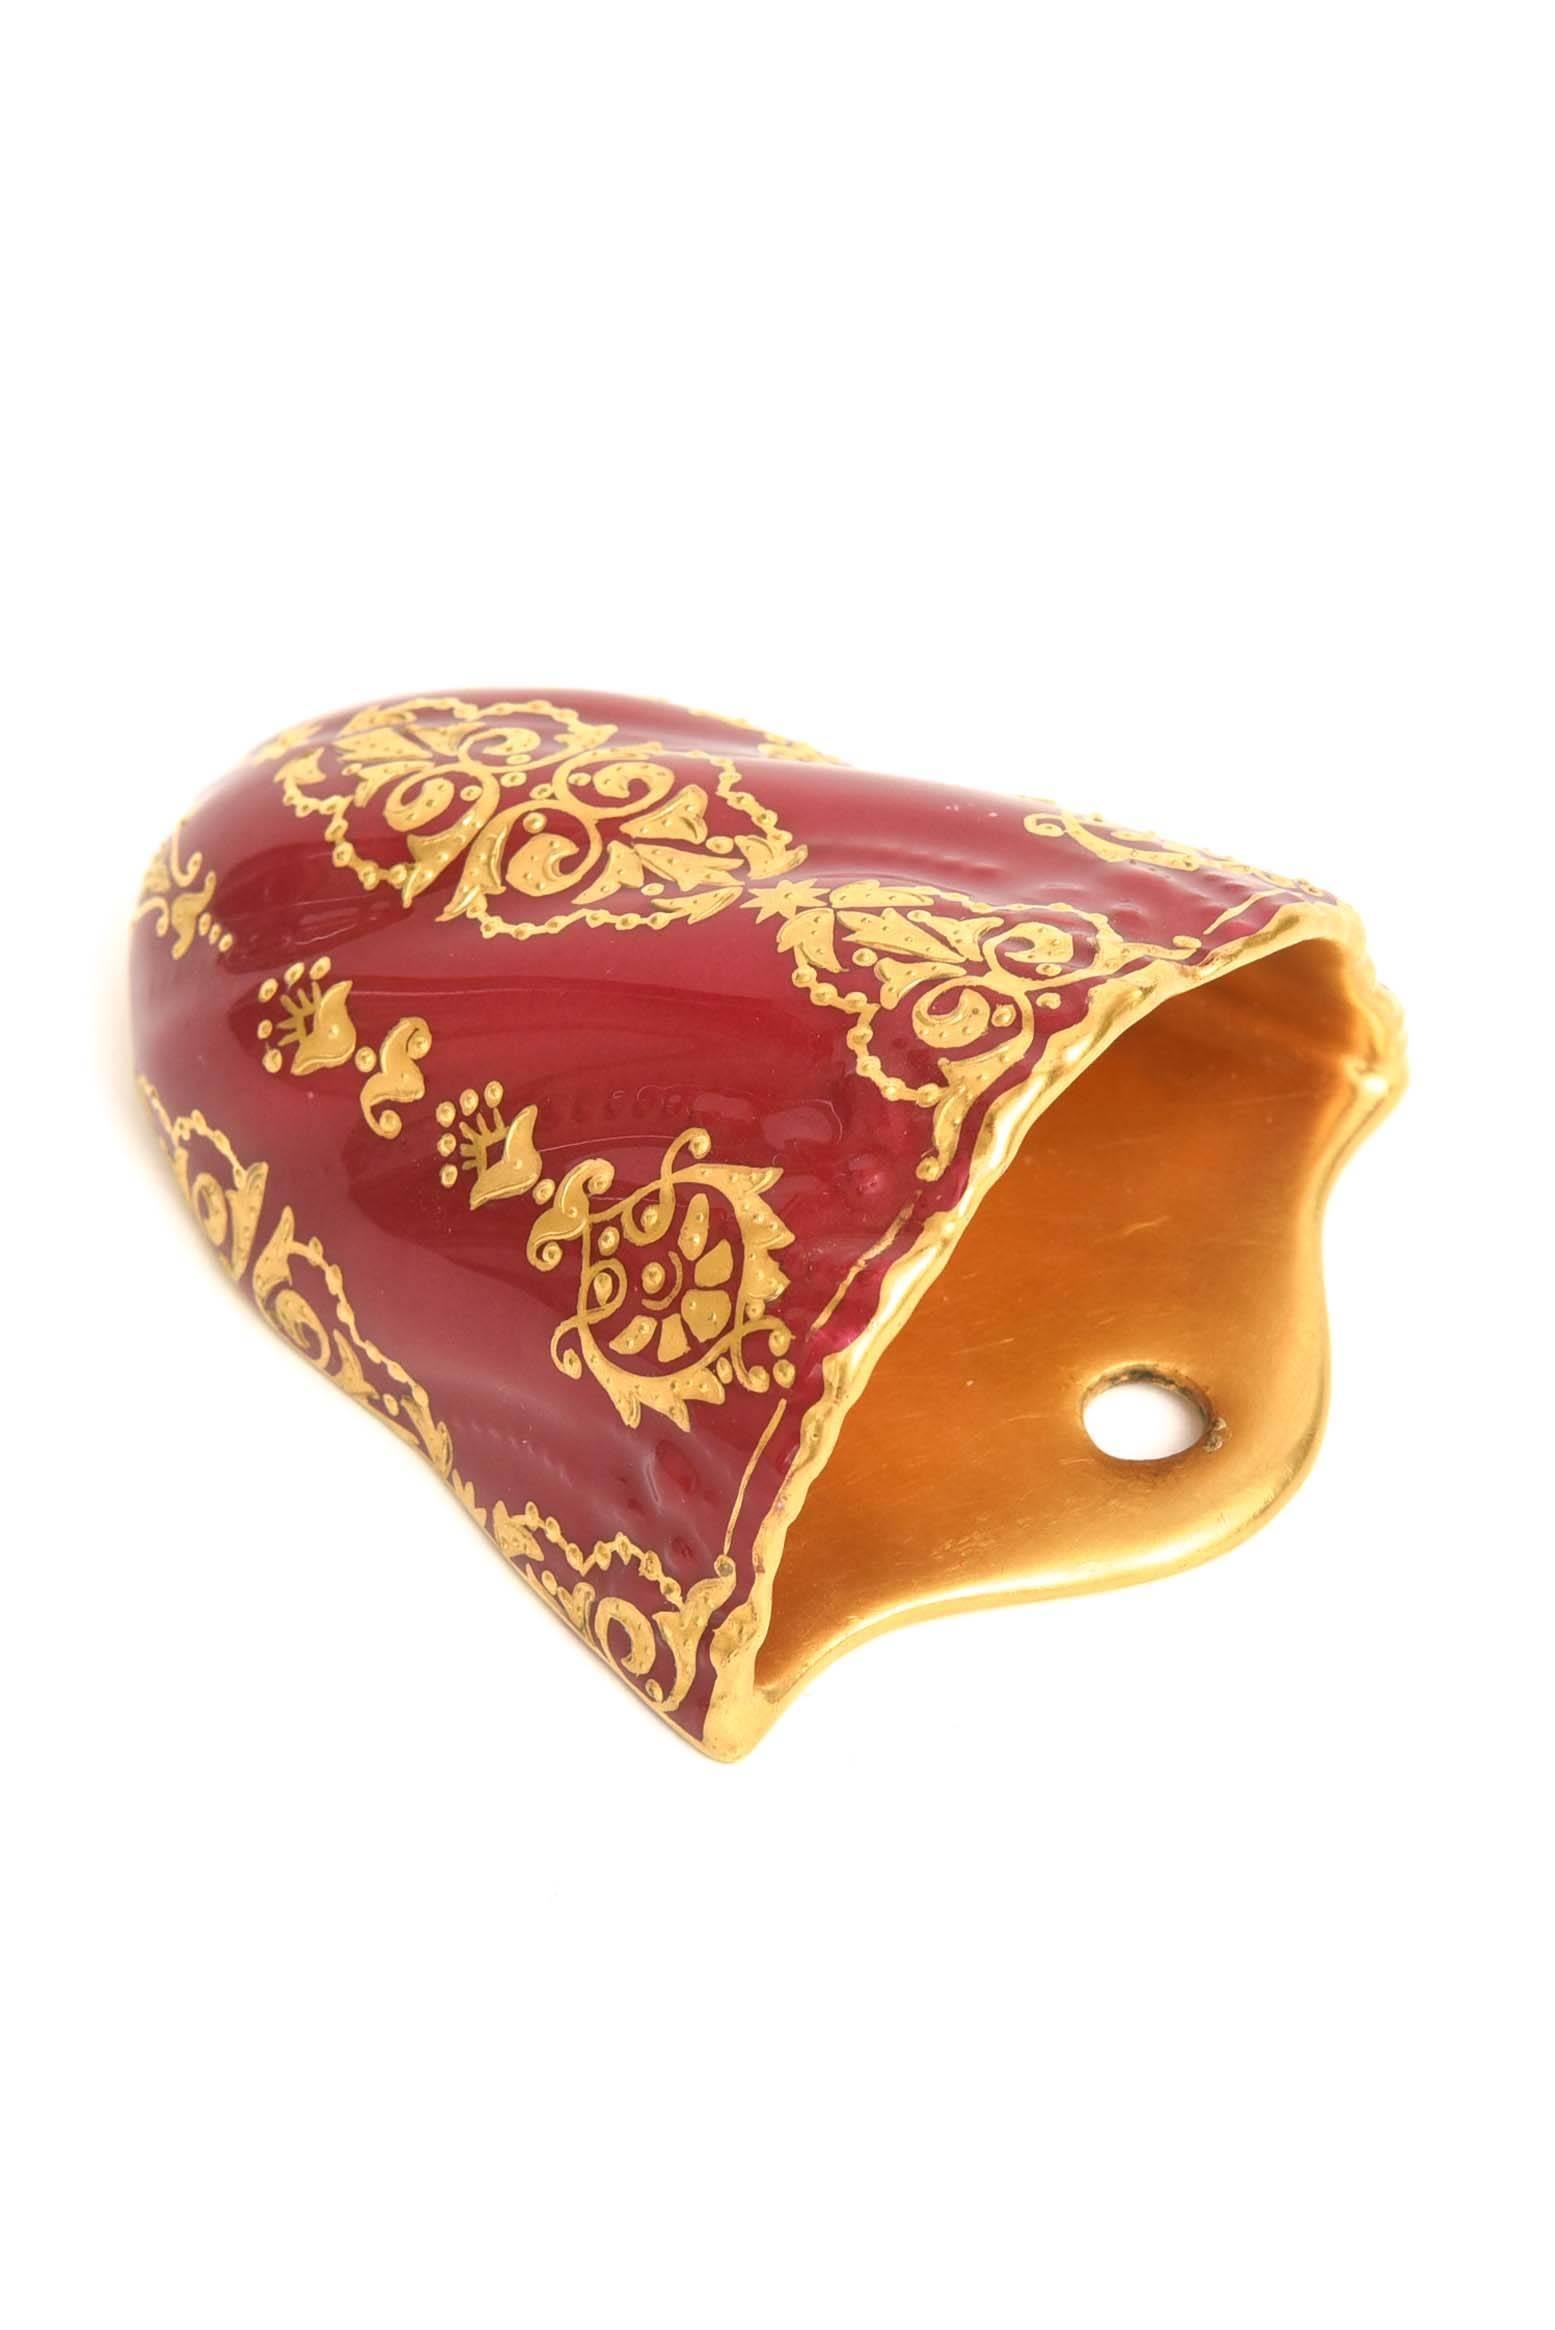 Charming Wall Pocket by Coalport, England, a Ruby Red and Gilt Encrusted Jem 1